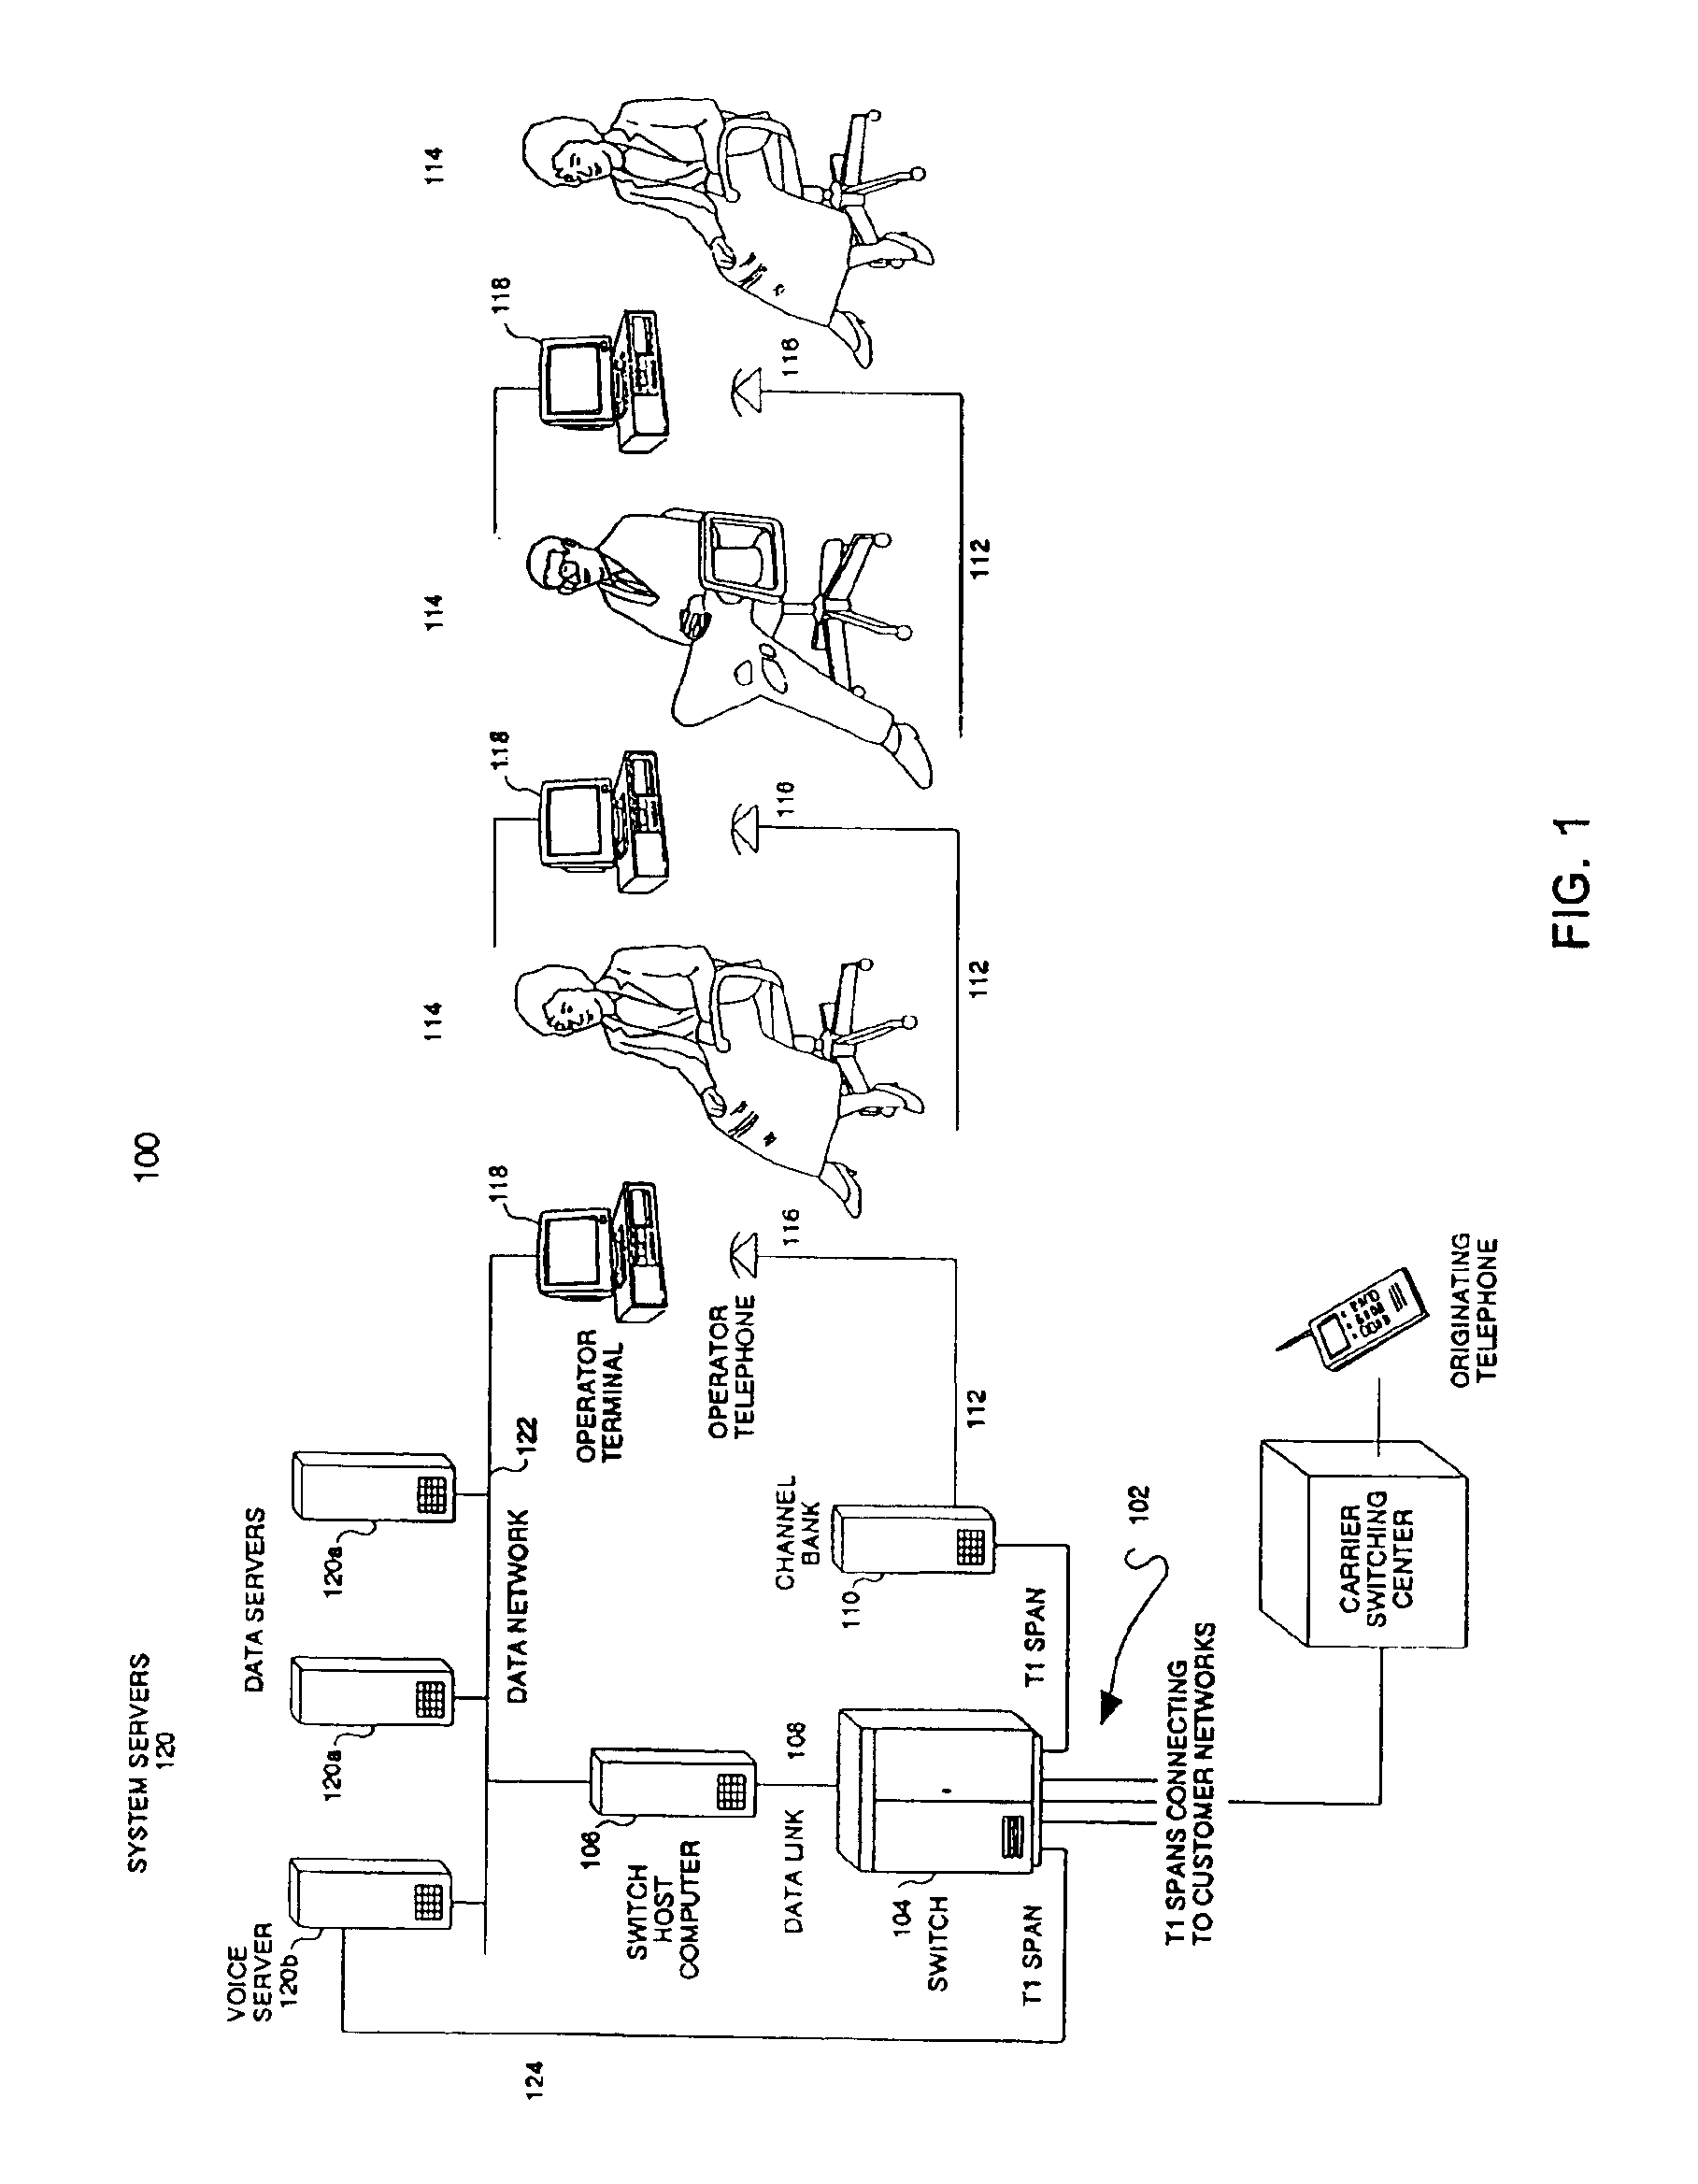 Method and apparatus for monitoring telephonic members and providing directory assistance